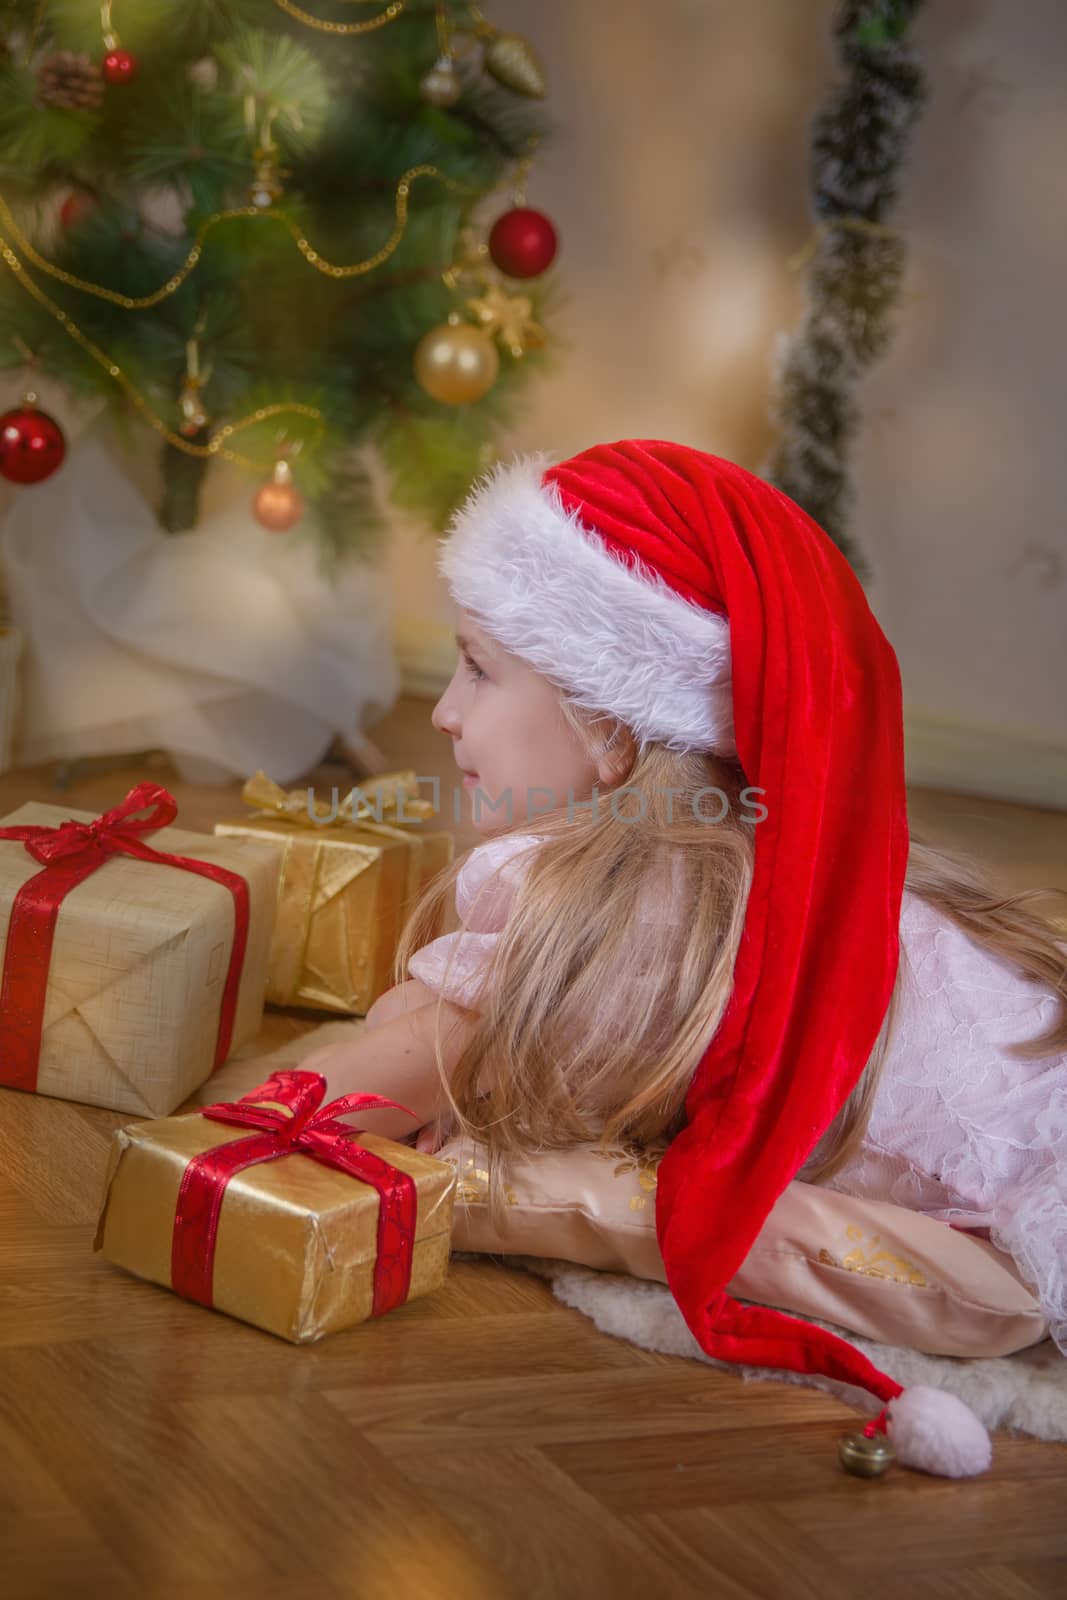 Girl in Santa hat dreaming under Christmas tree with gifts by Angel_a